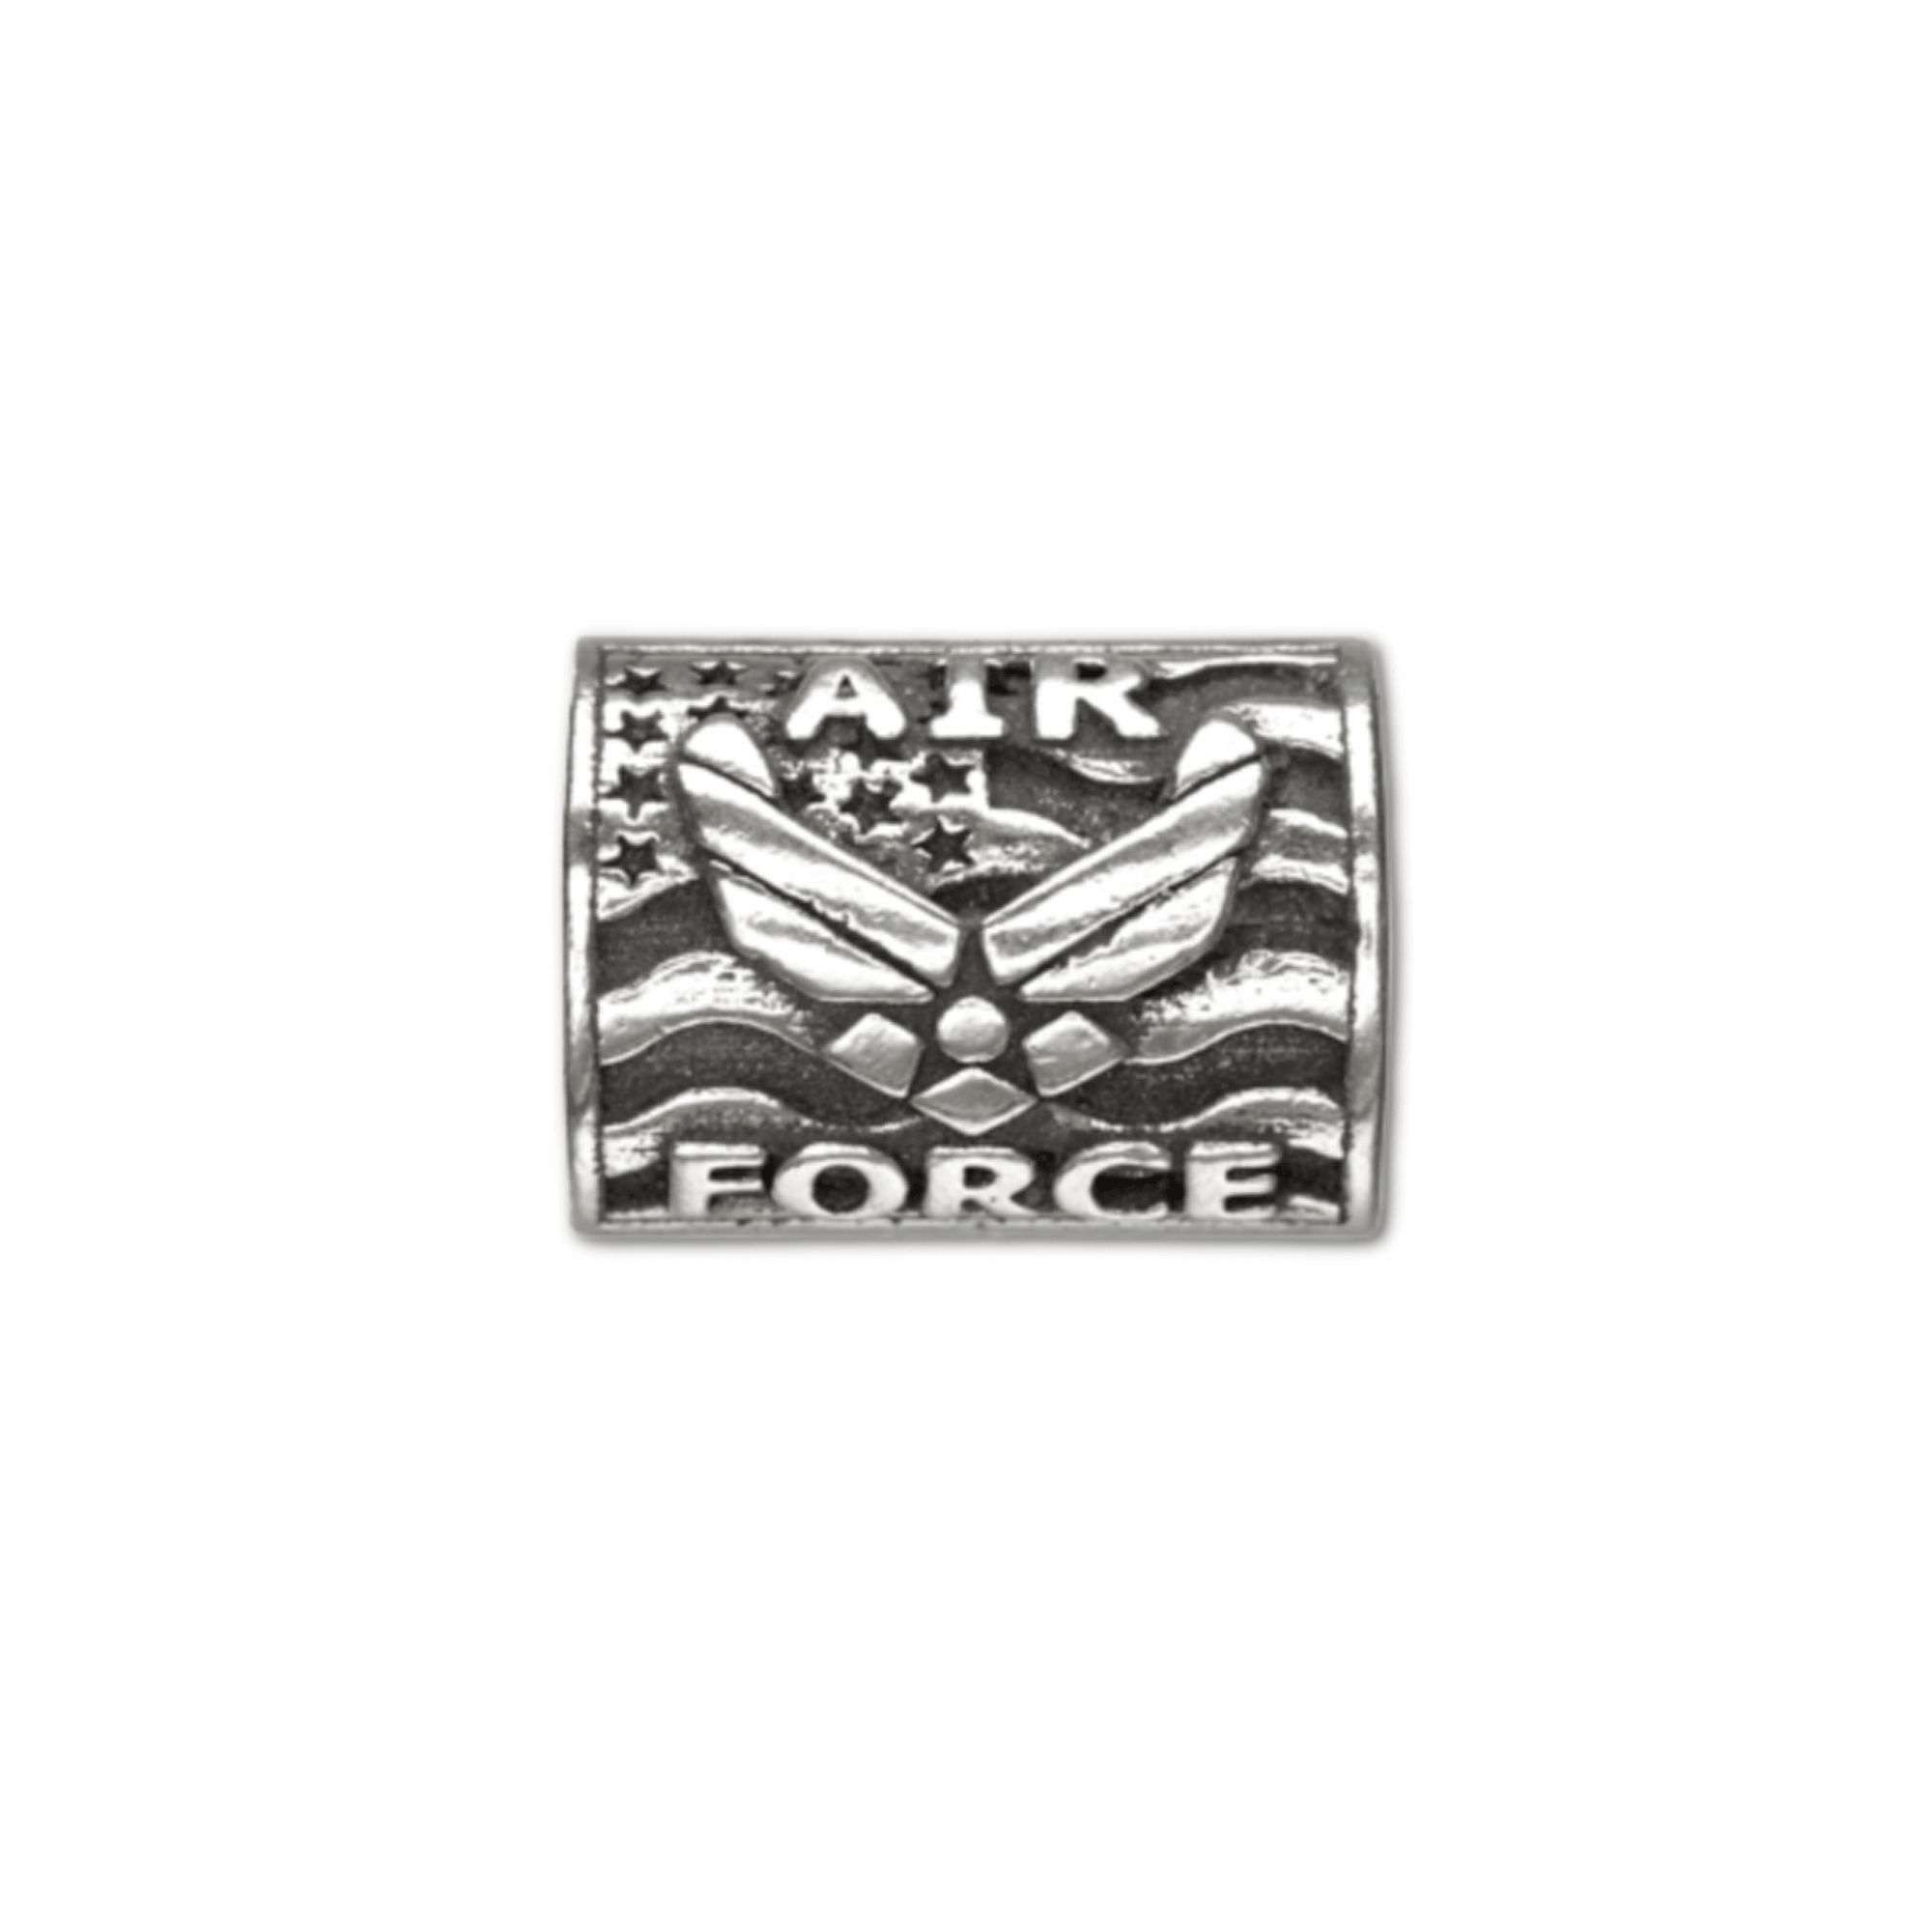  Military Jewelry, Military Charms, Military Gifts, USAF, United States Air Force Proud Air Force 